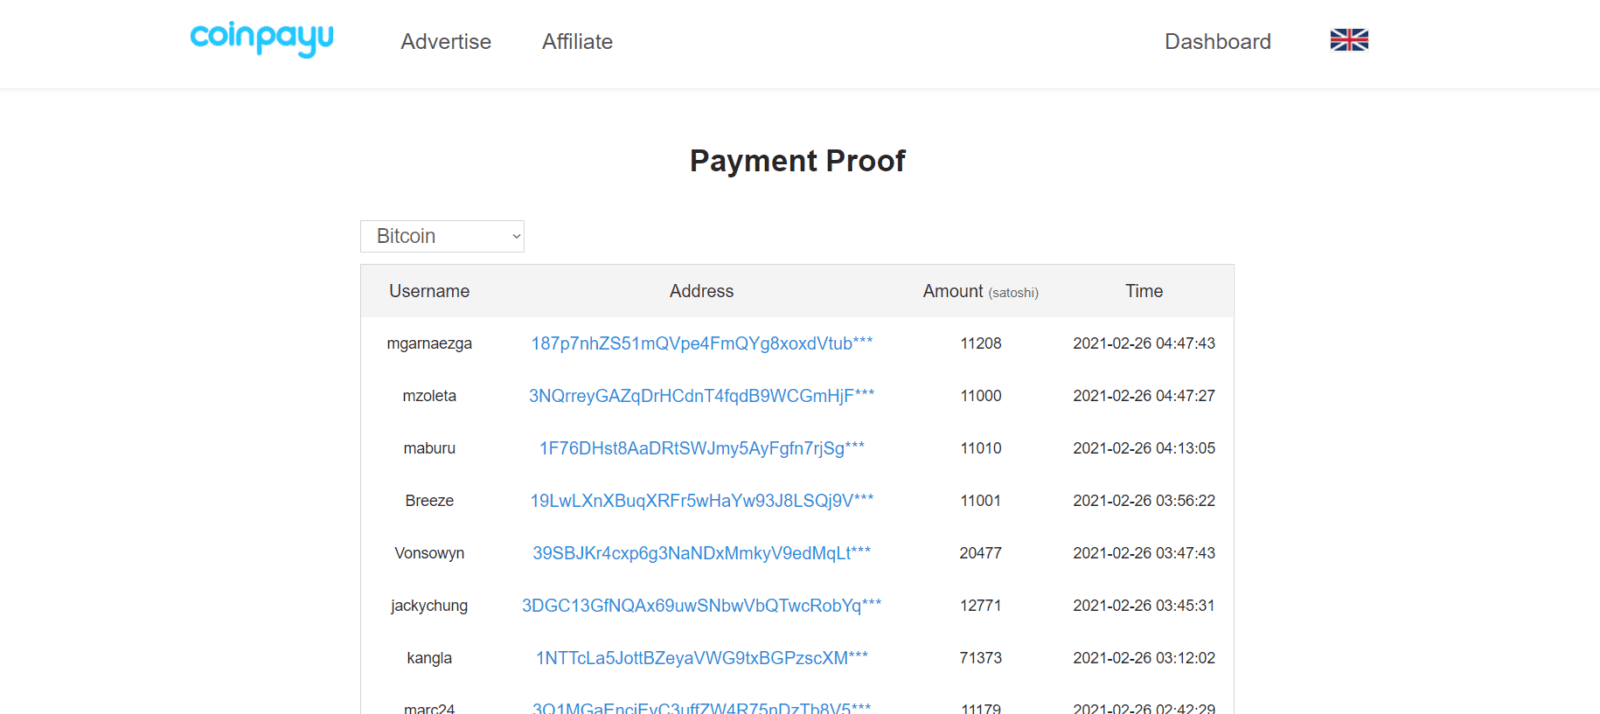 Coinpayu: Payment Proof